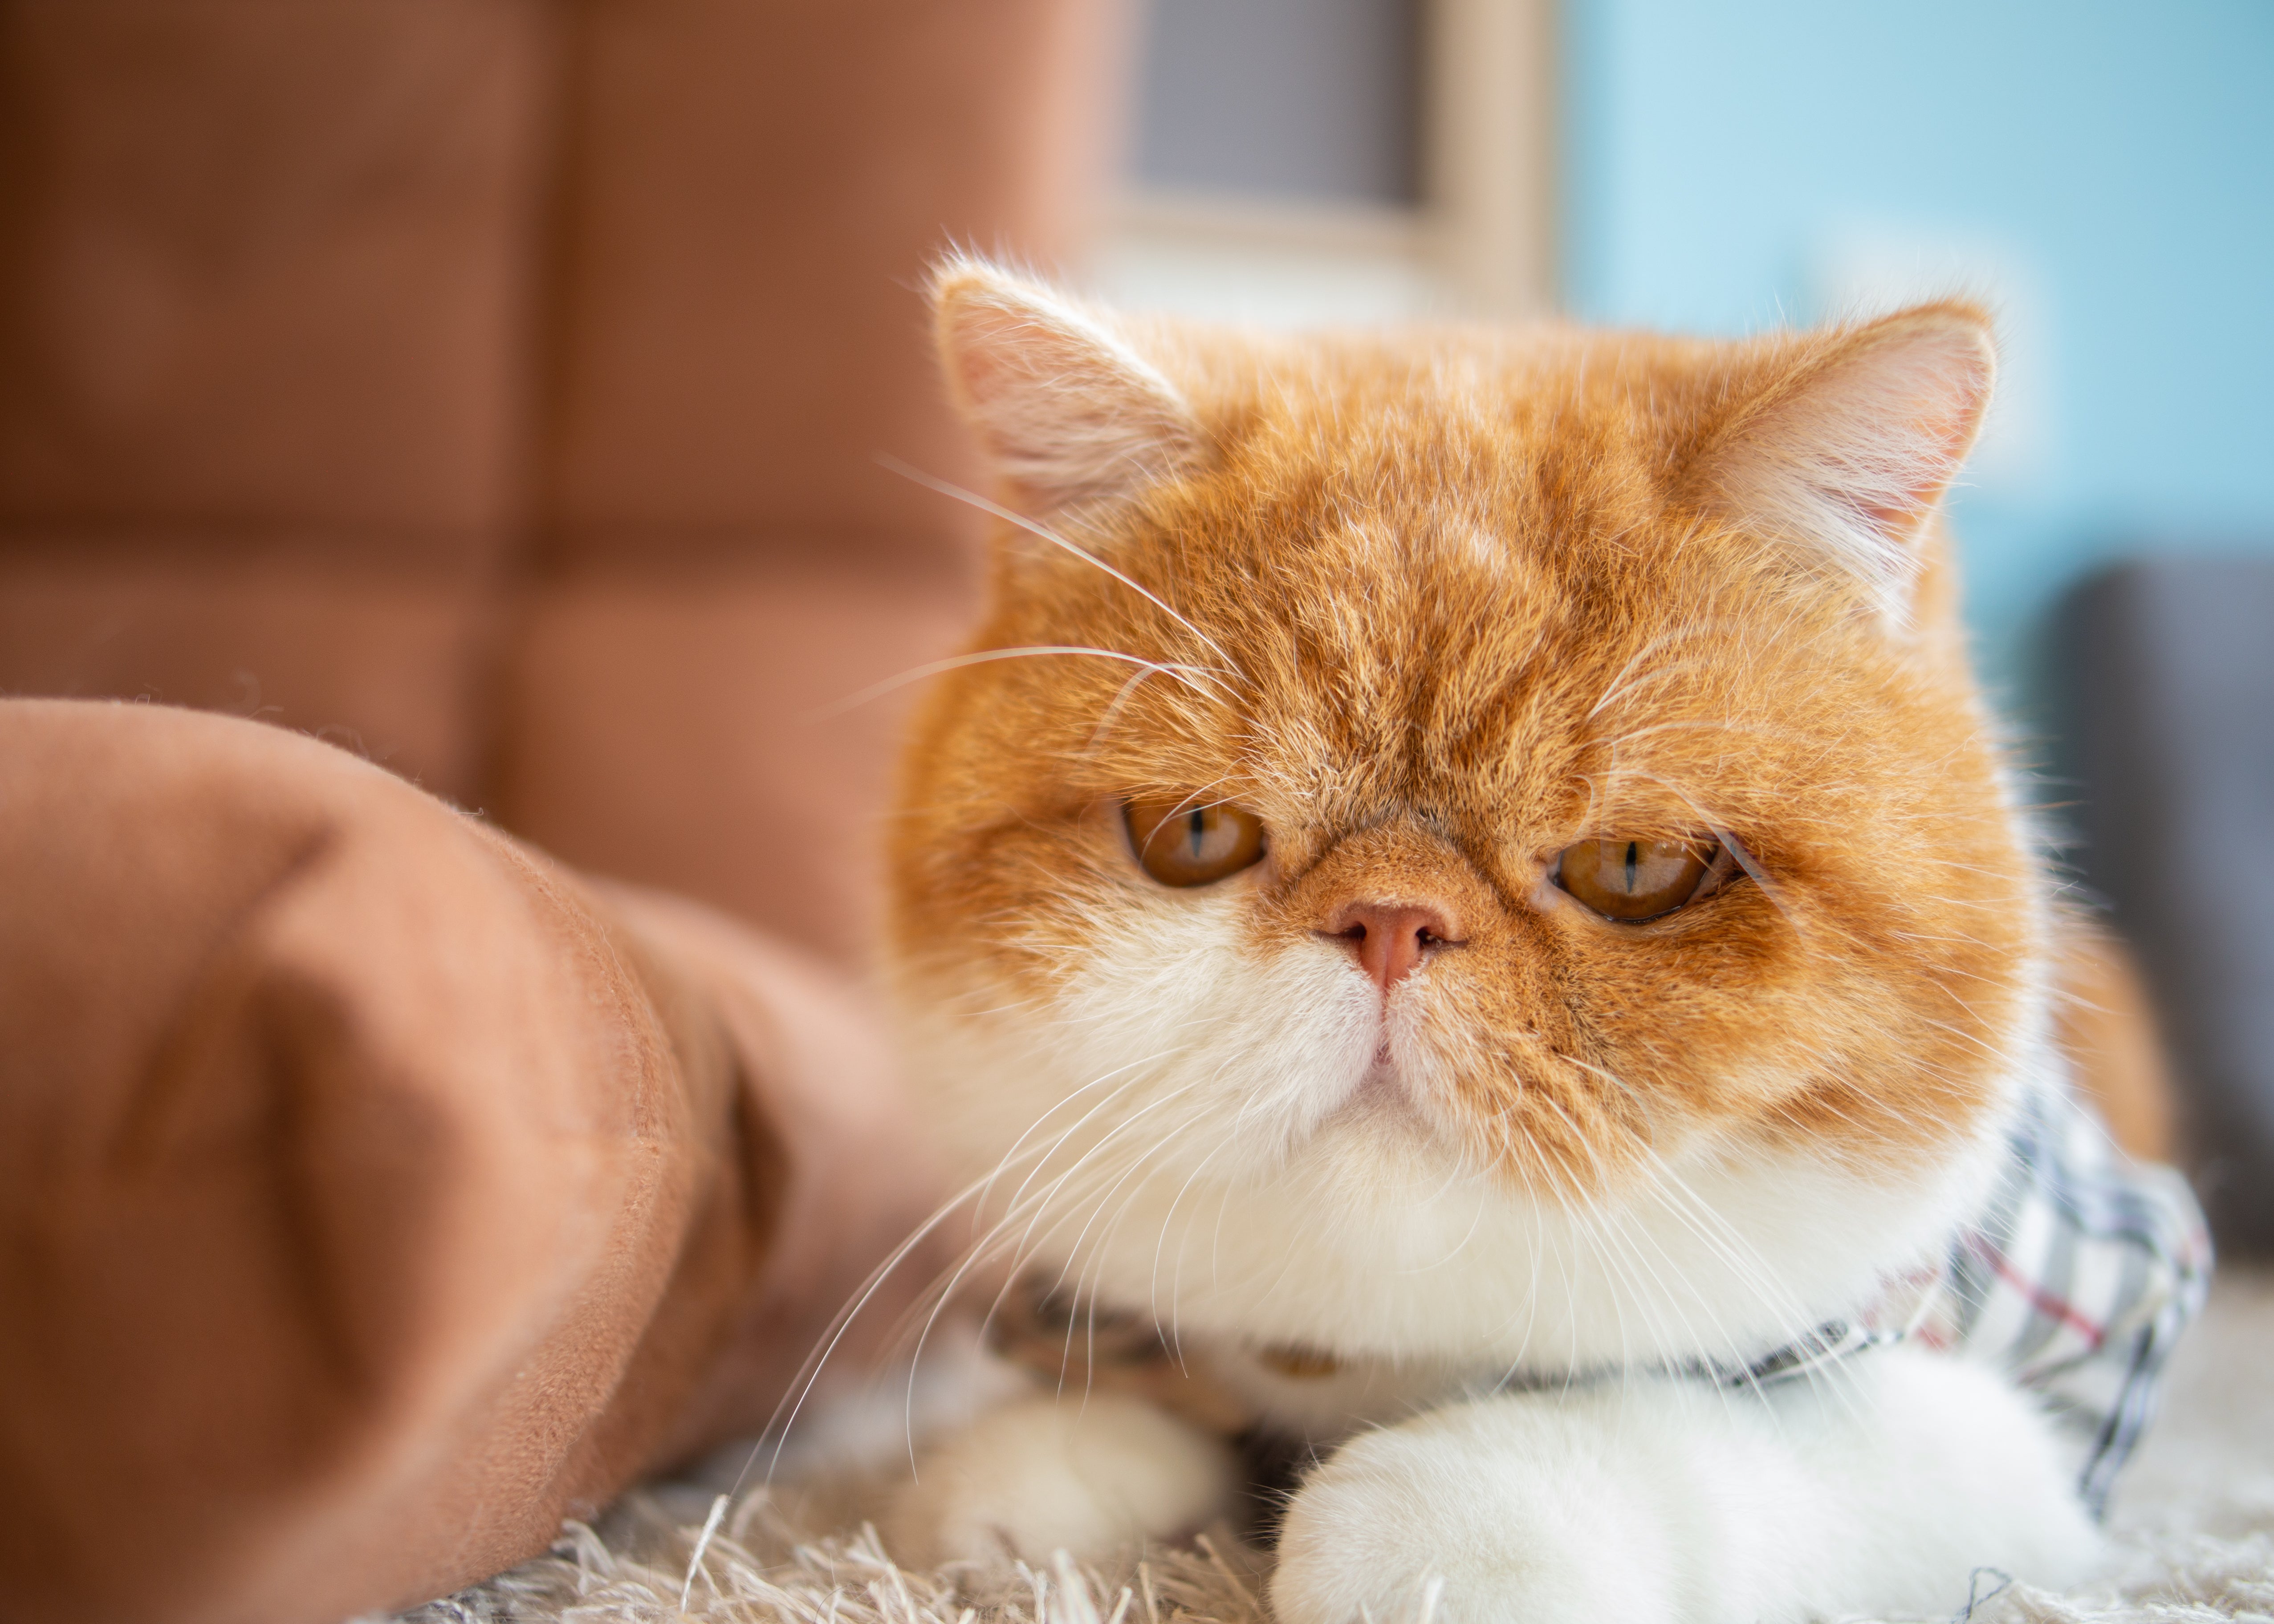 How to help your stressed cat?